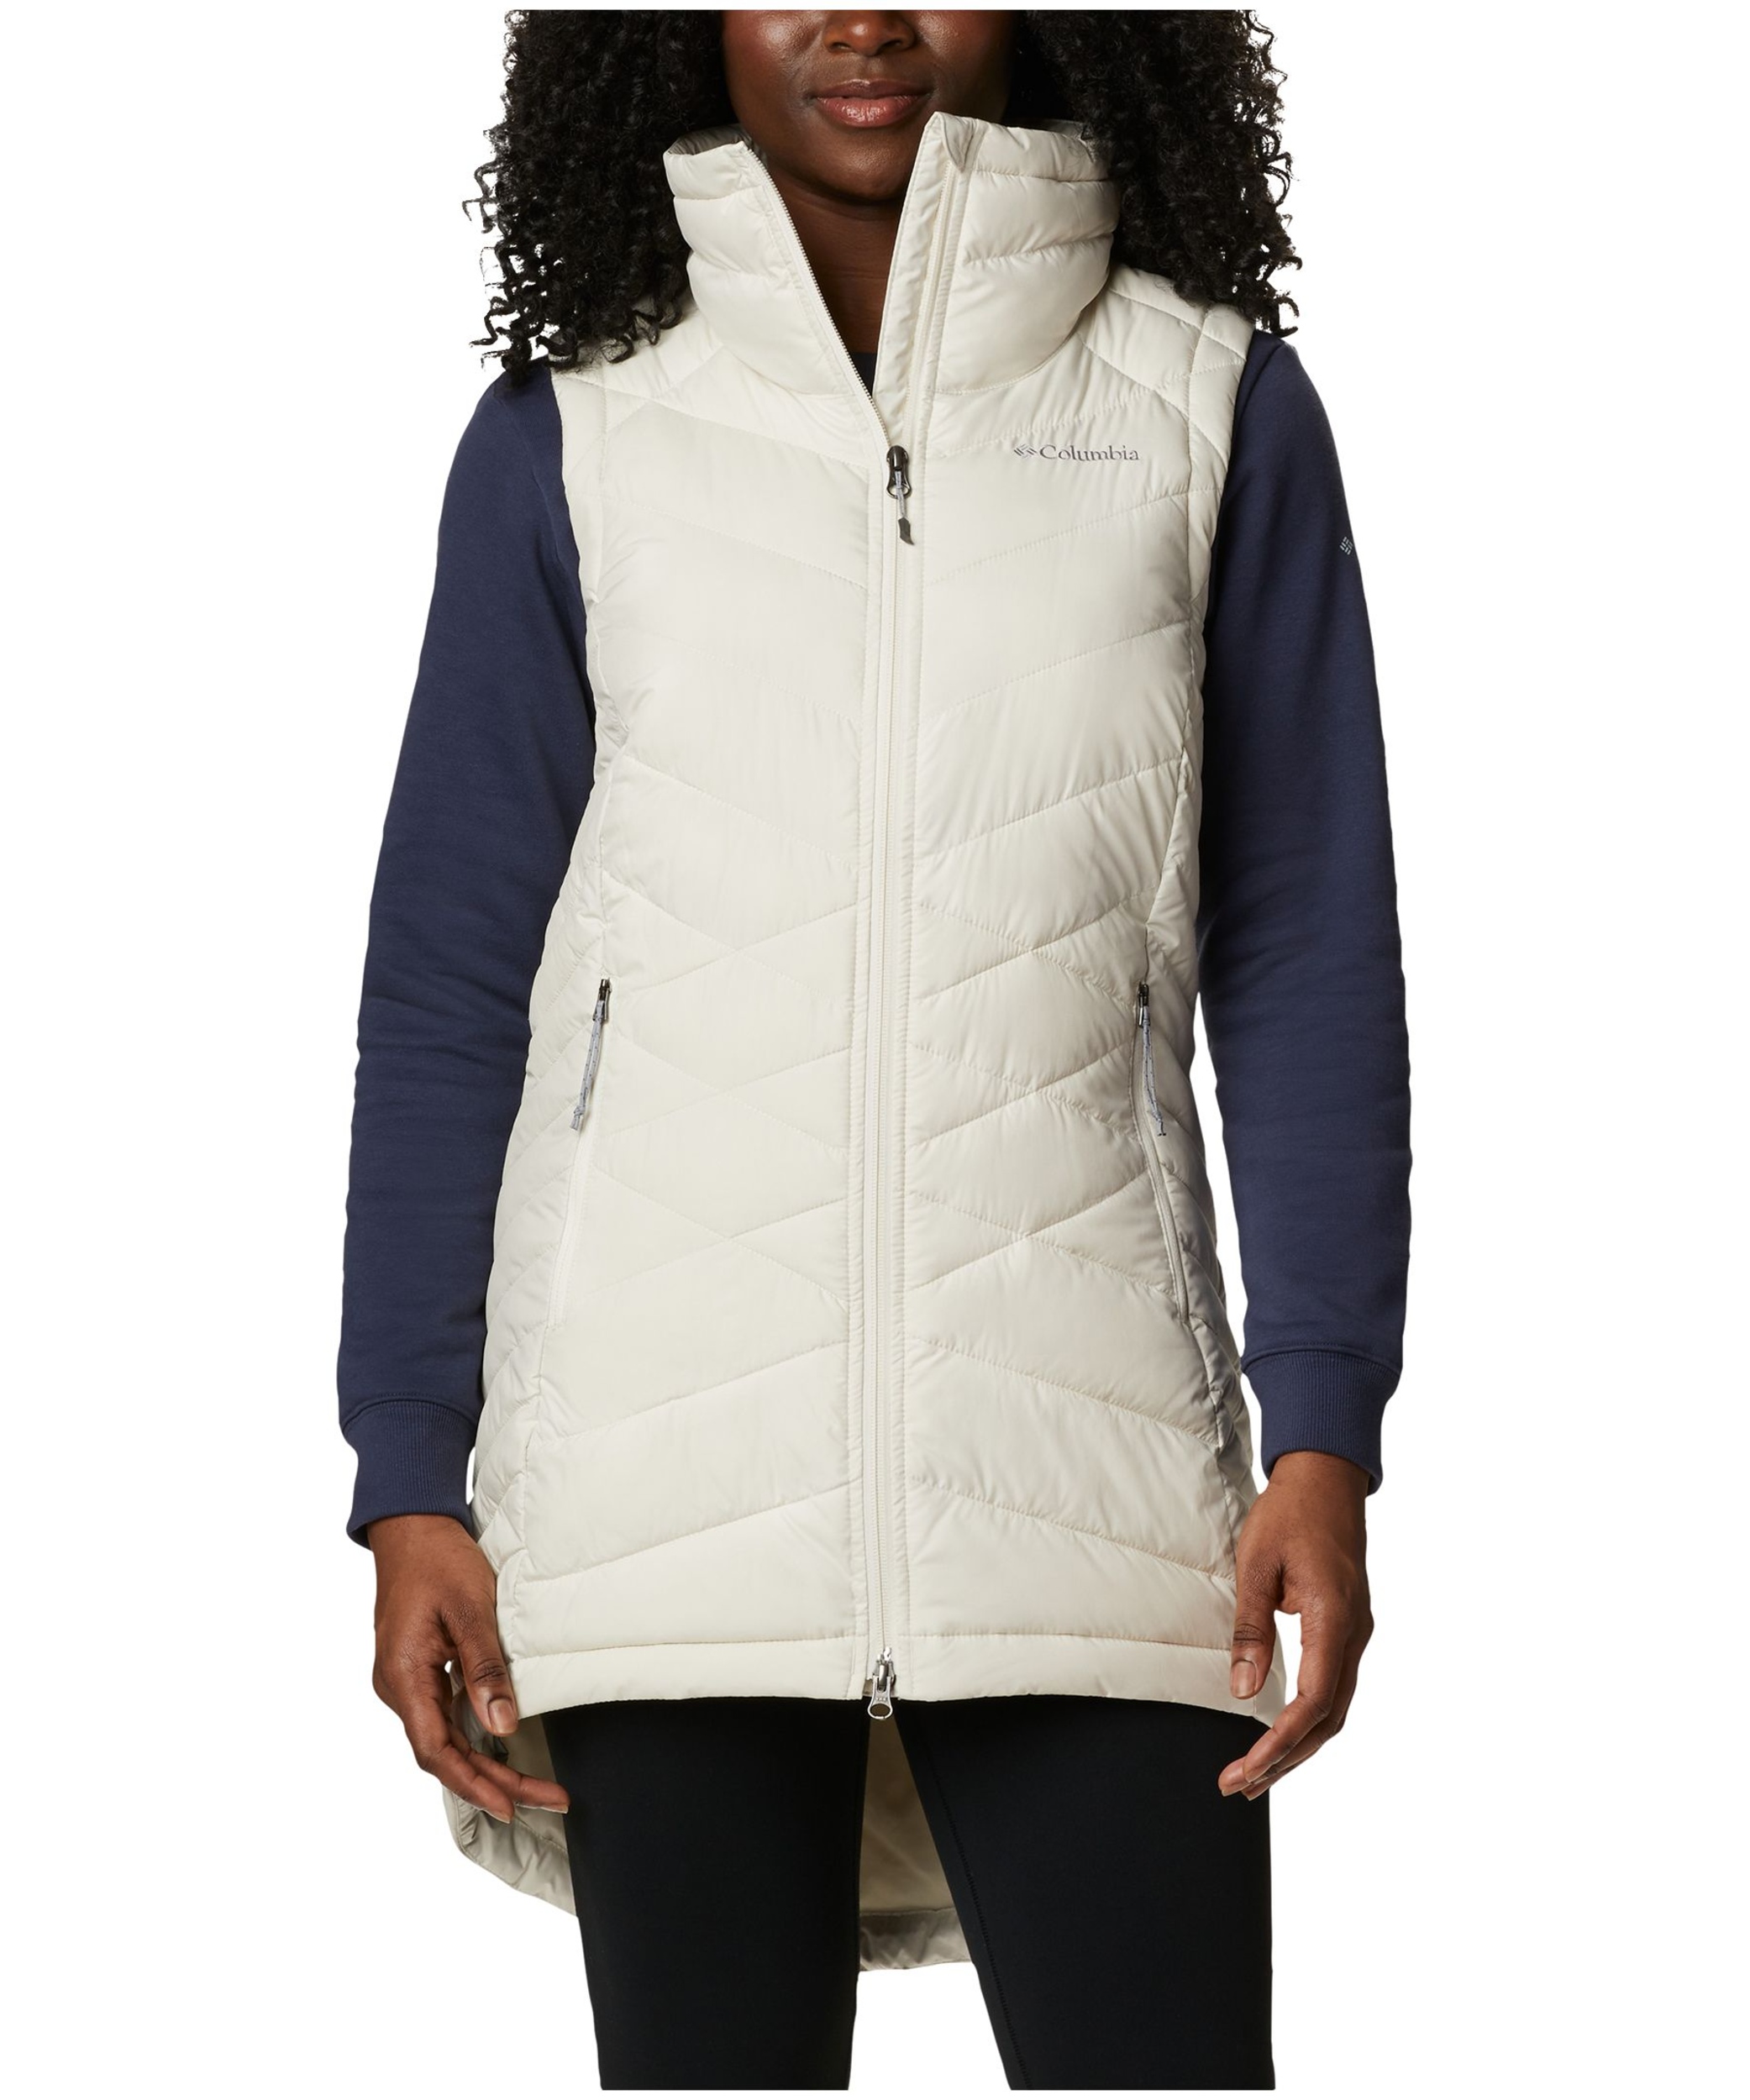 Columbia Women's Heavenly Vest, Insulated, Semi-Fitted, Winter, Long ...